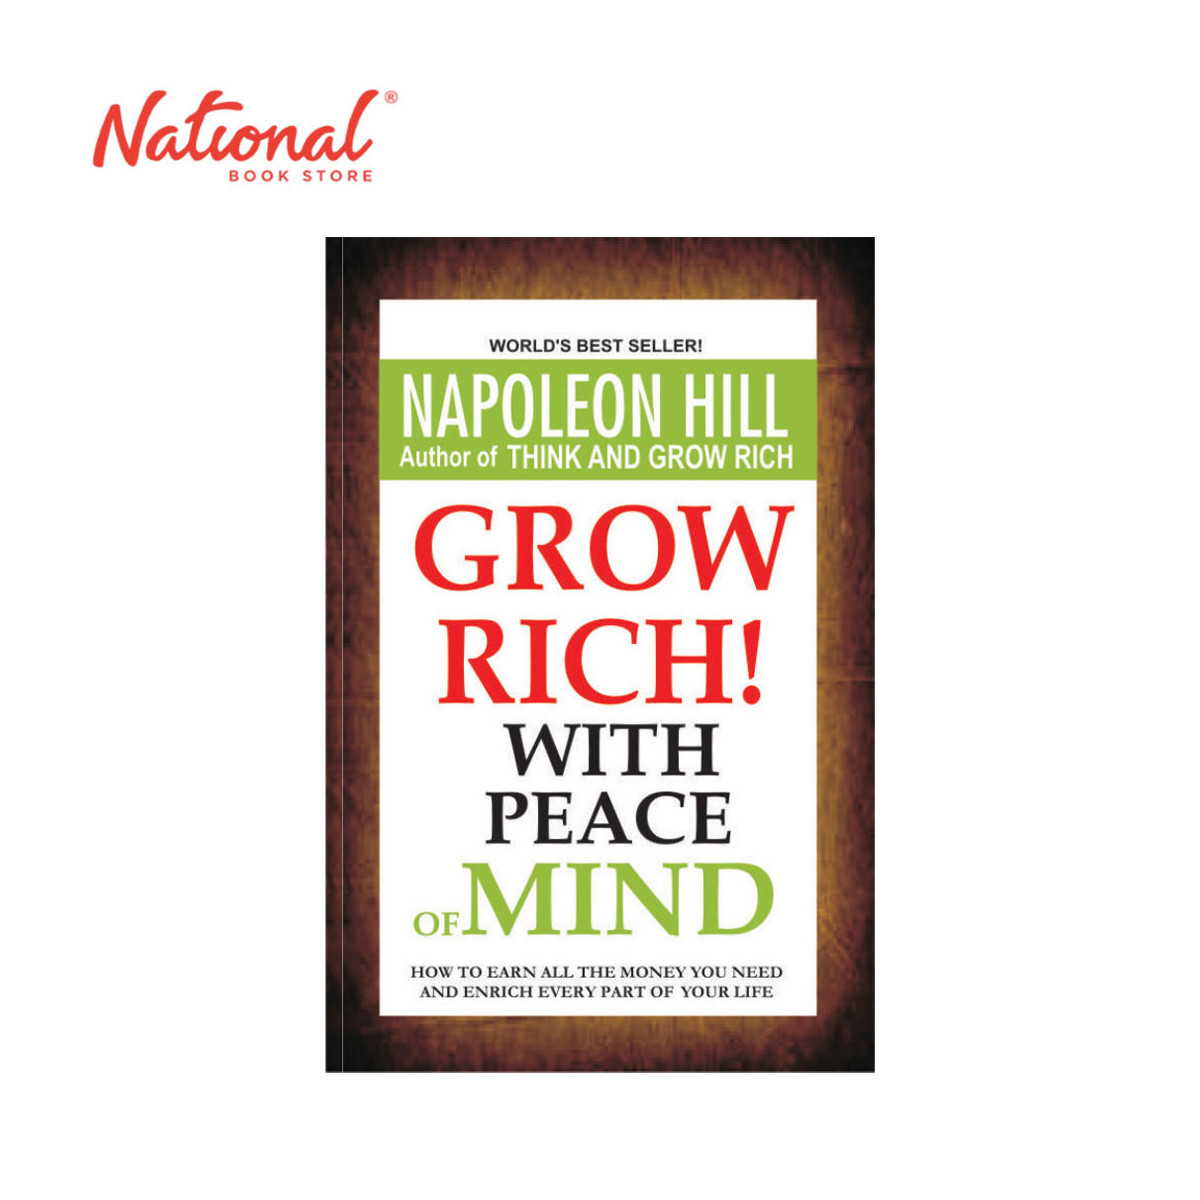 Grow Rich With Peace of Mind by Napoleon Hill - Trade Paperback - Self-Help Books